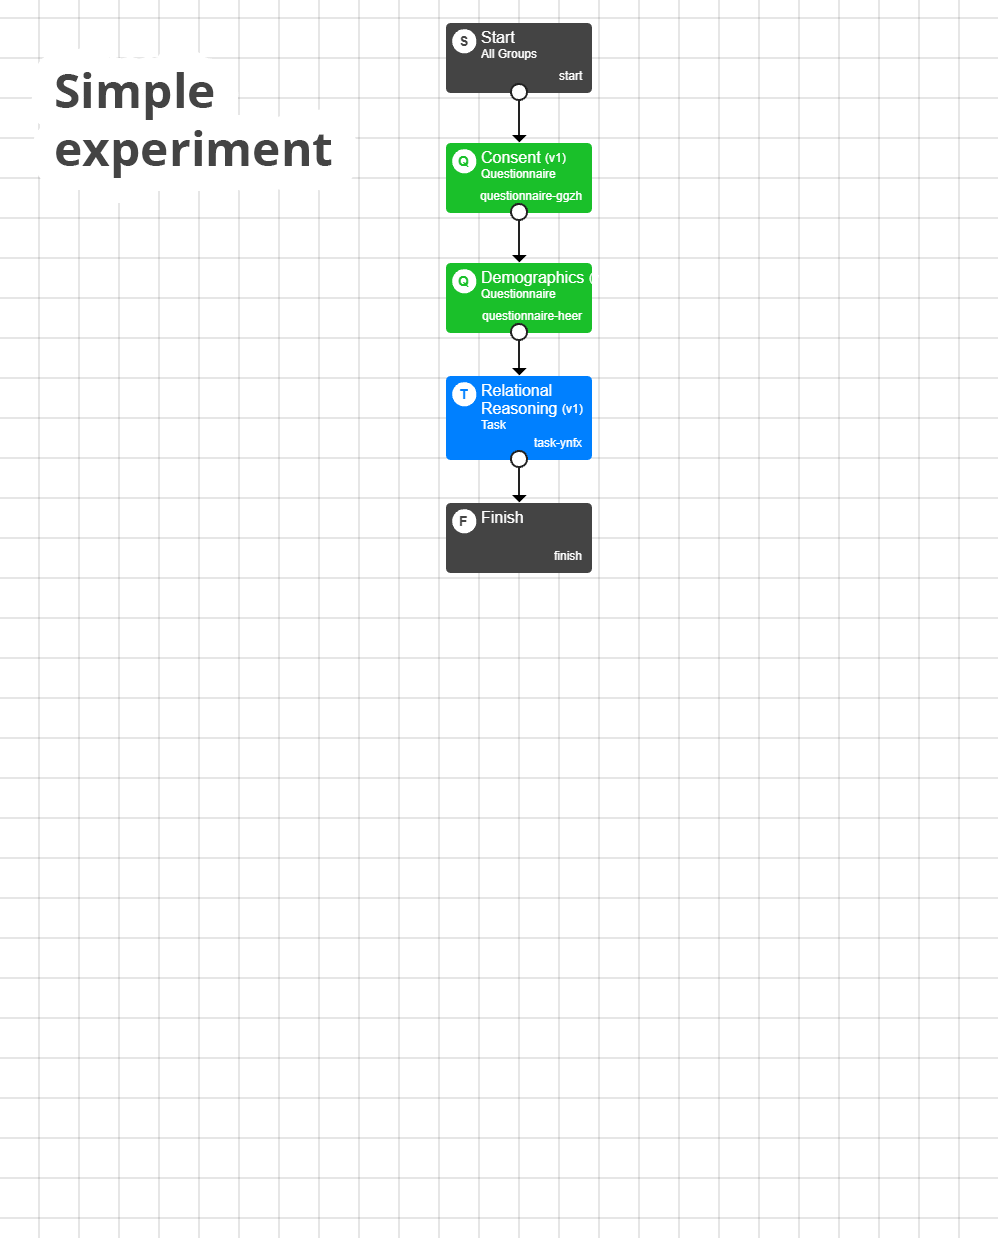 Setting up online experiments easily